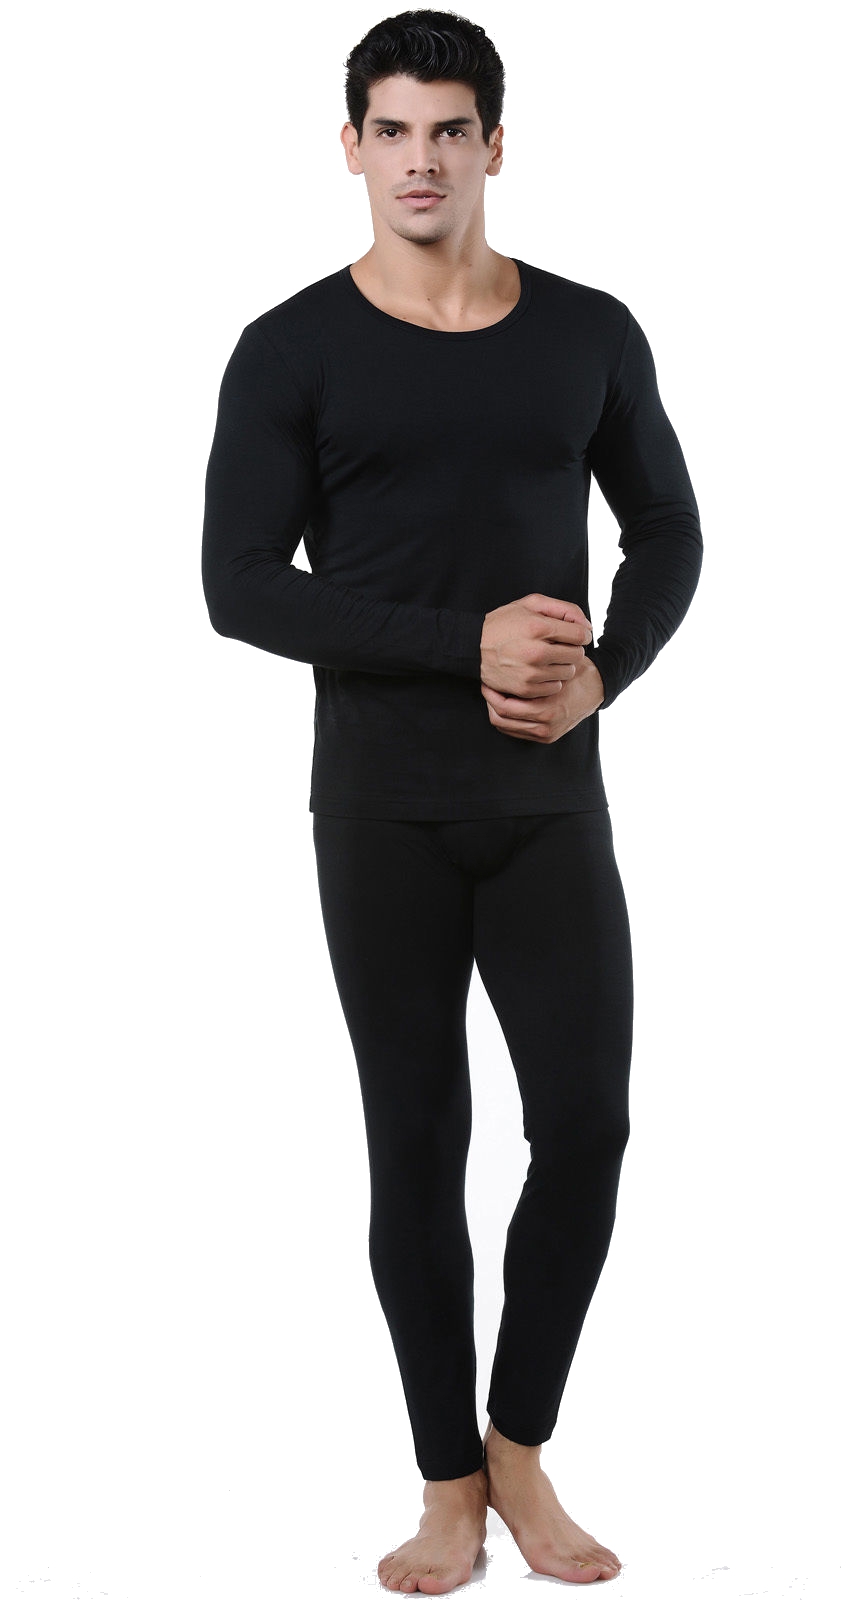 9M Men’s Ultra Soft Fleece Lined Thermal Base Layer Top & Bottom ...